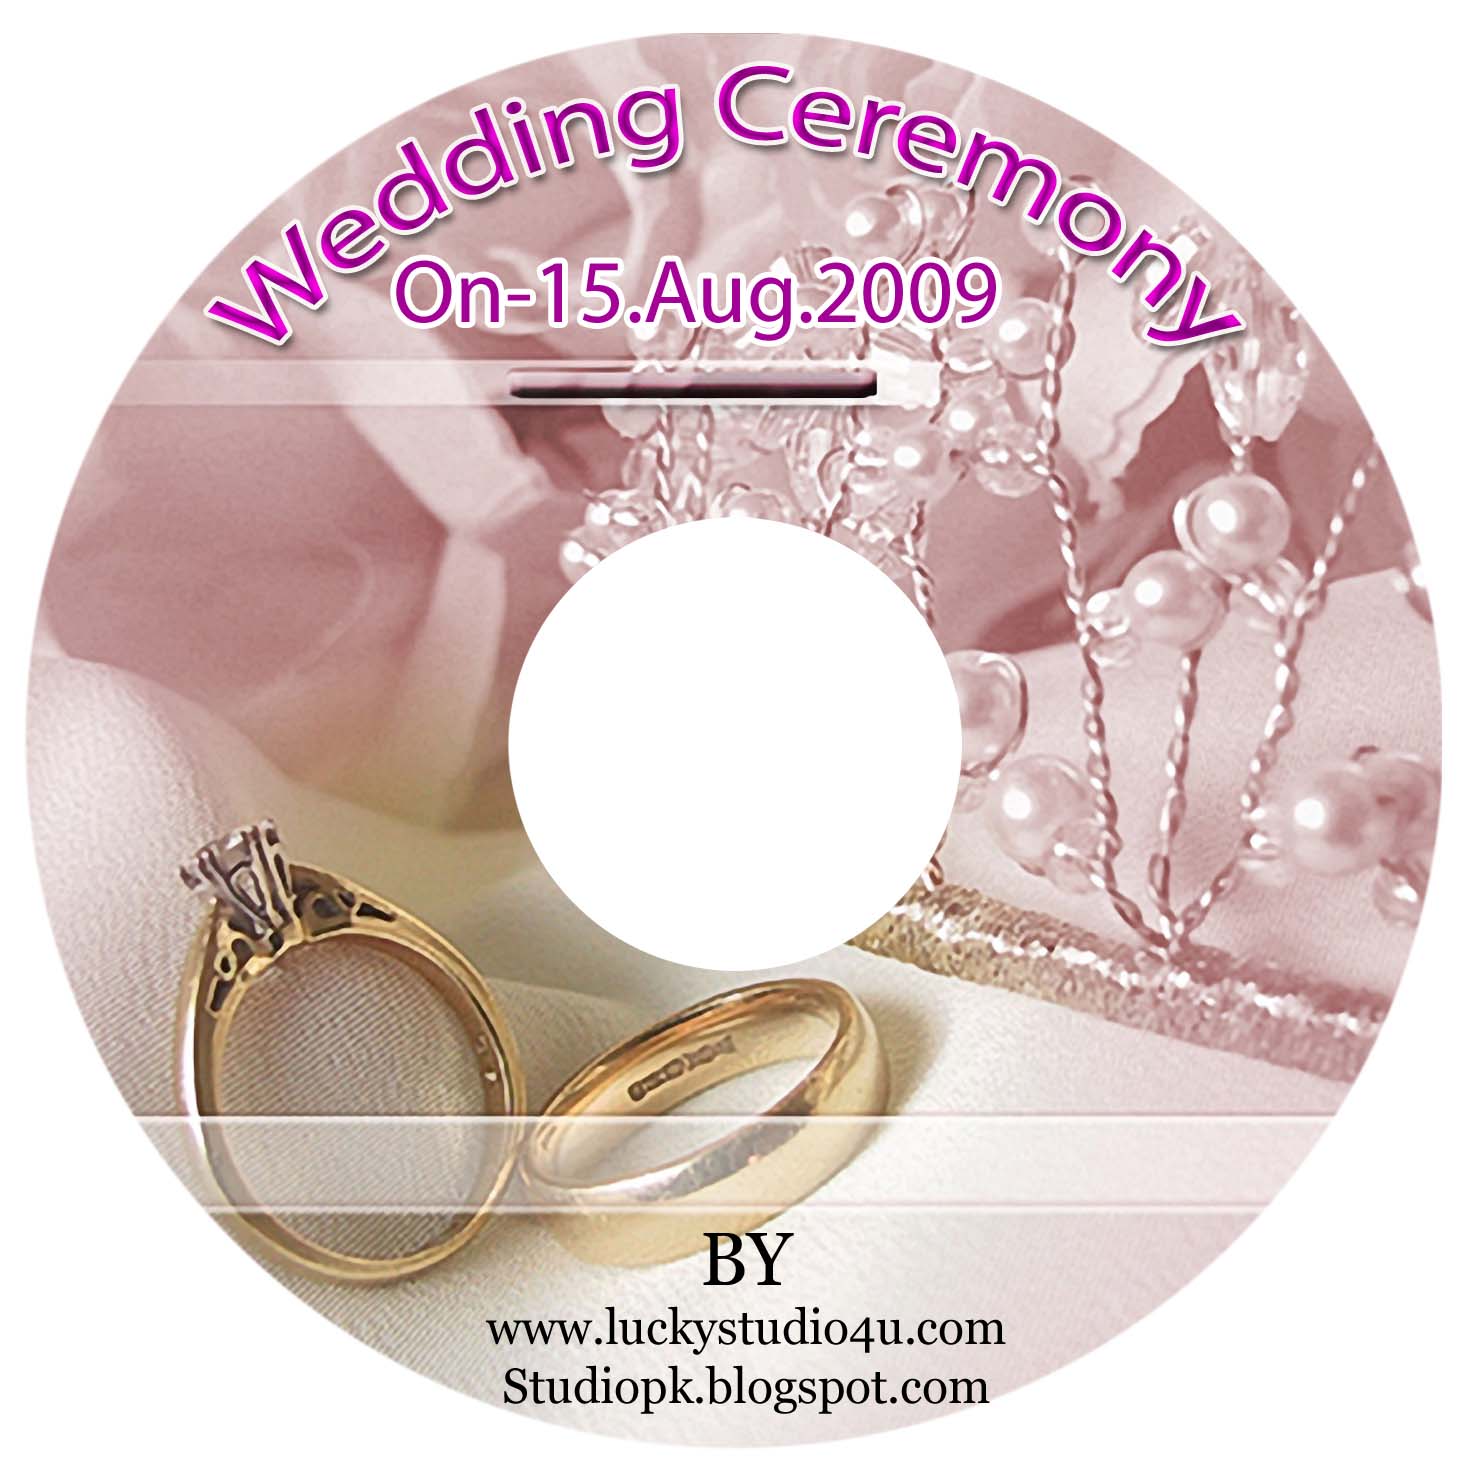 27-wedding-dvd-cover-psd-templates-free-download